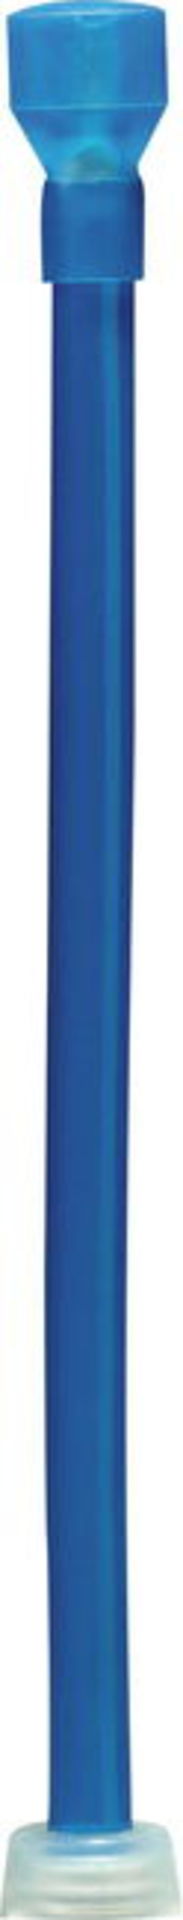 Camelbak Quick Stow Flask Tube Adapter